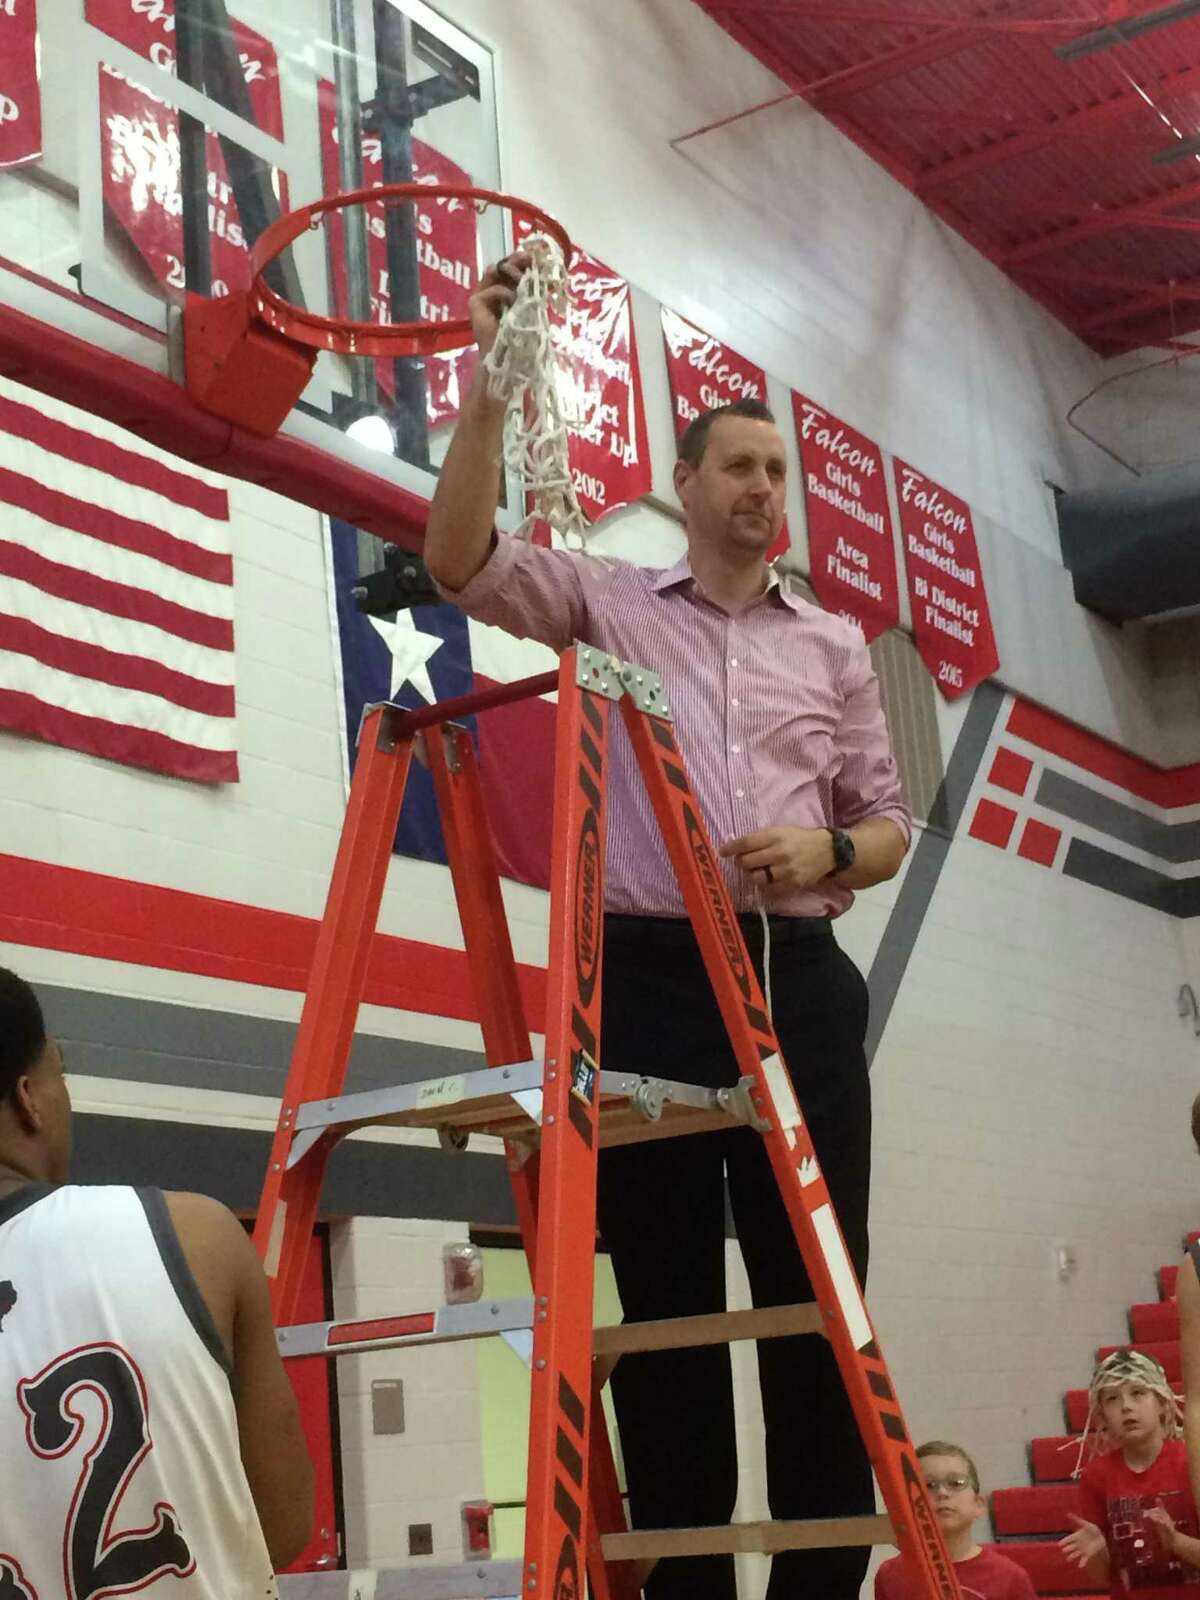 Coach Scott Barrett proudly holds the net after the team finishes cutting it down after the Hargrave boys basketball team completed an undefeated district championship in the 2016-2017 season.